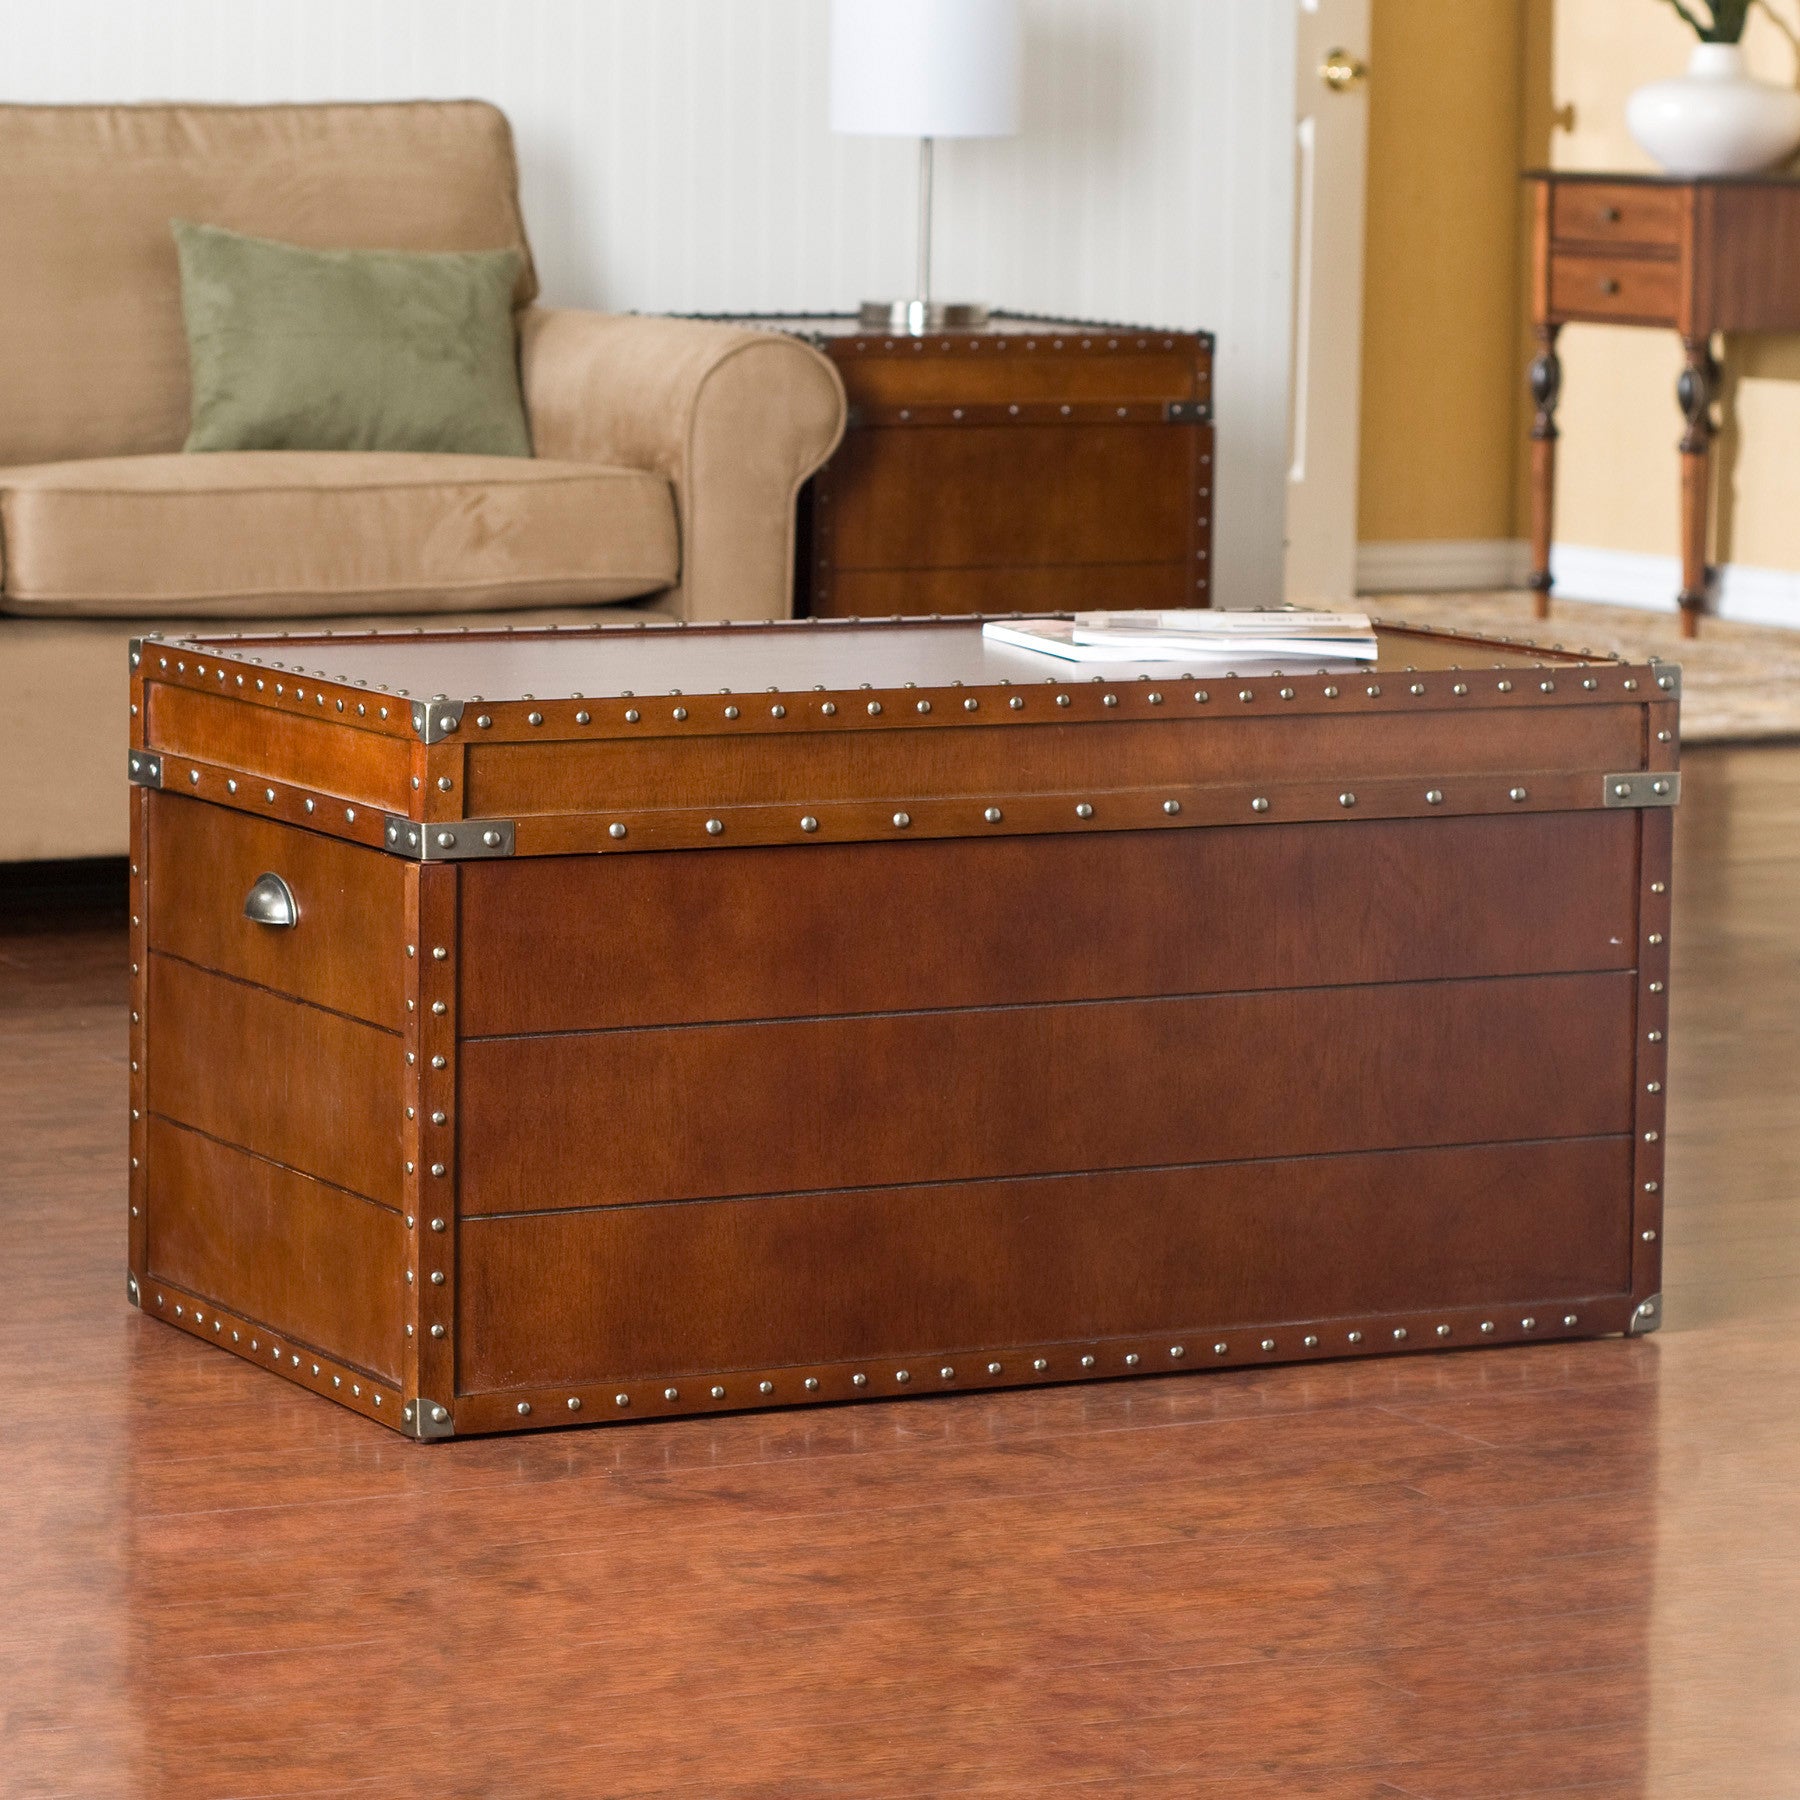 Steam Trunk Coffee Table